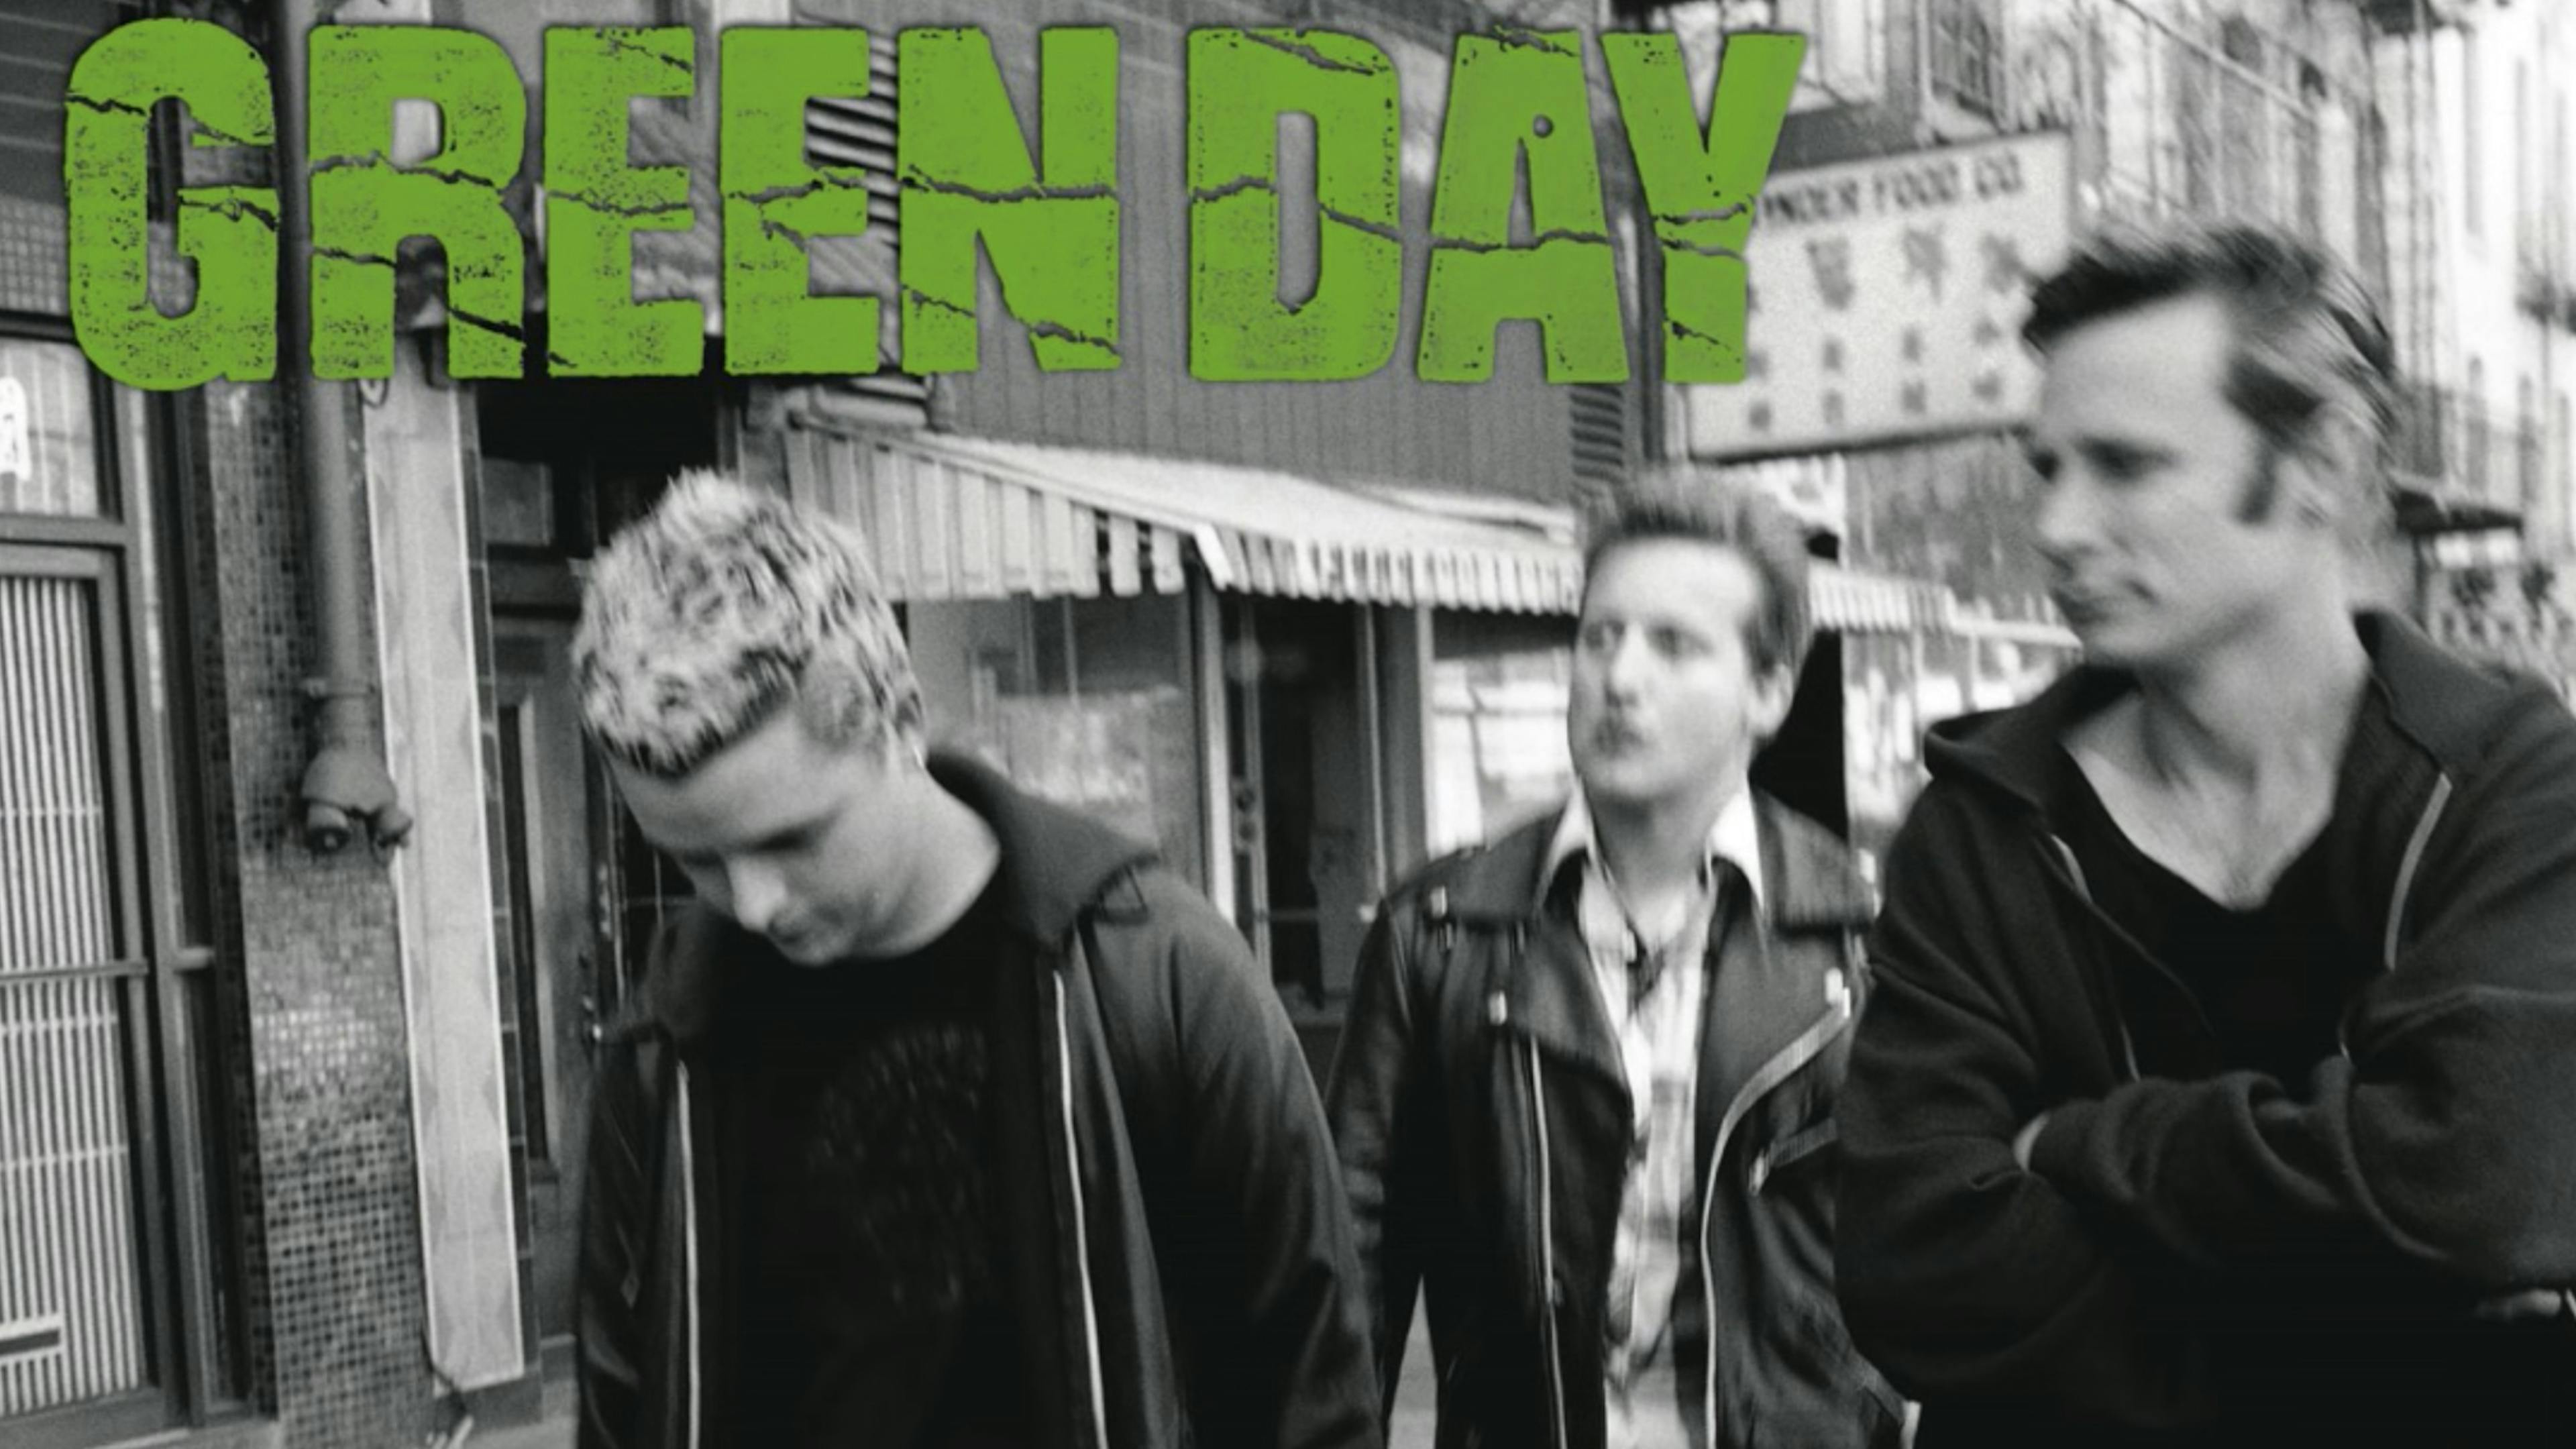 “We’ve gone to some places that we’ve never been before”: The story of Green Day’s Warning